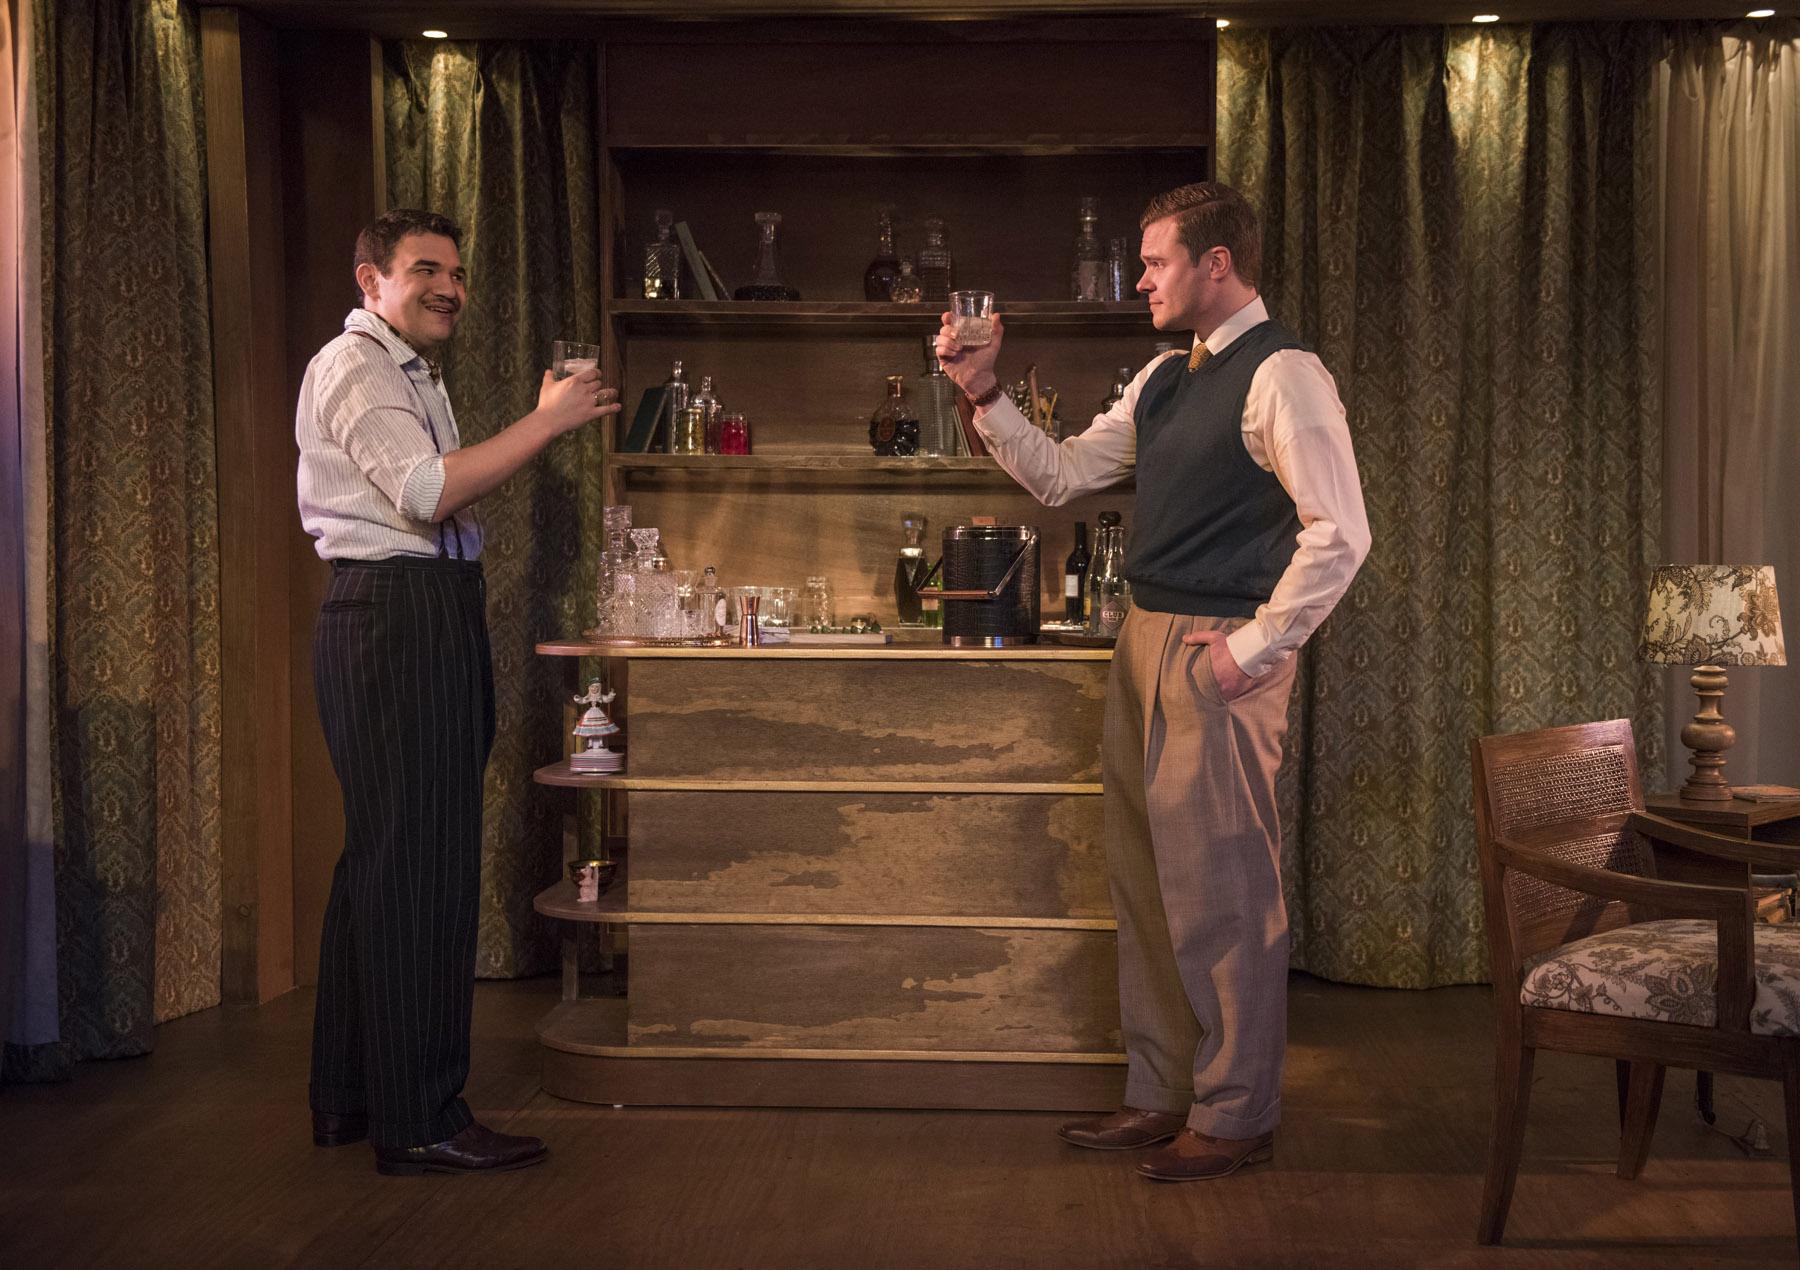 Rudy Galvan, left, and Curtis Edward Jackson in “The Gentleman Caller.” (Photo by Michael Brosilow)